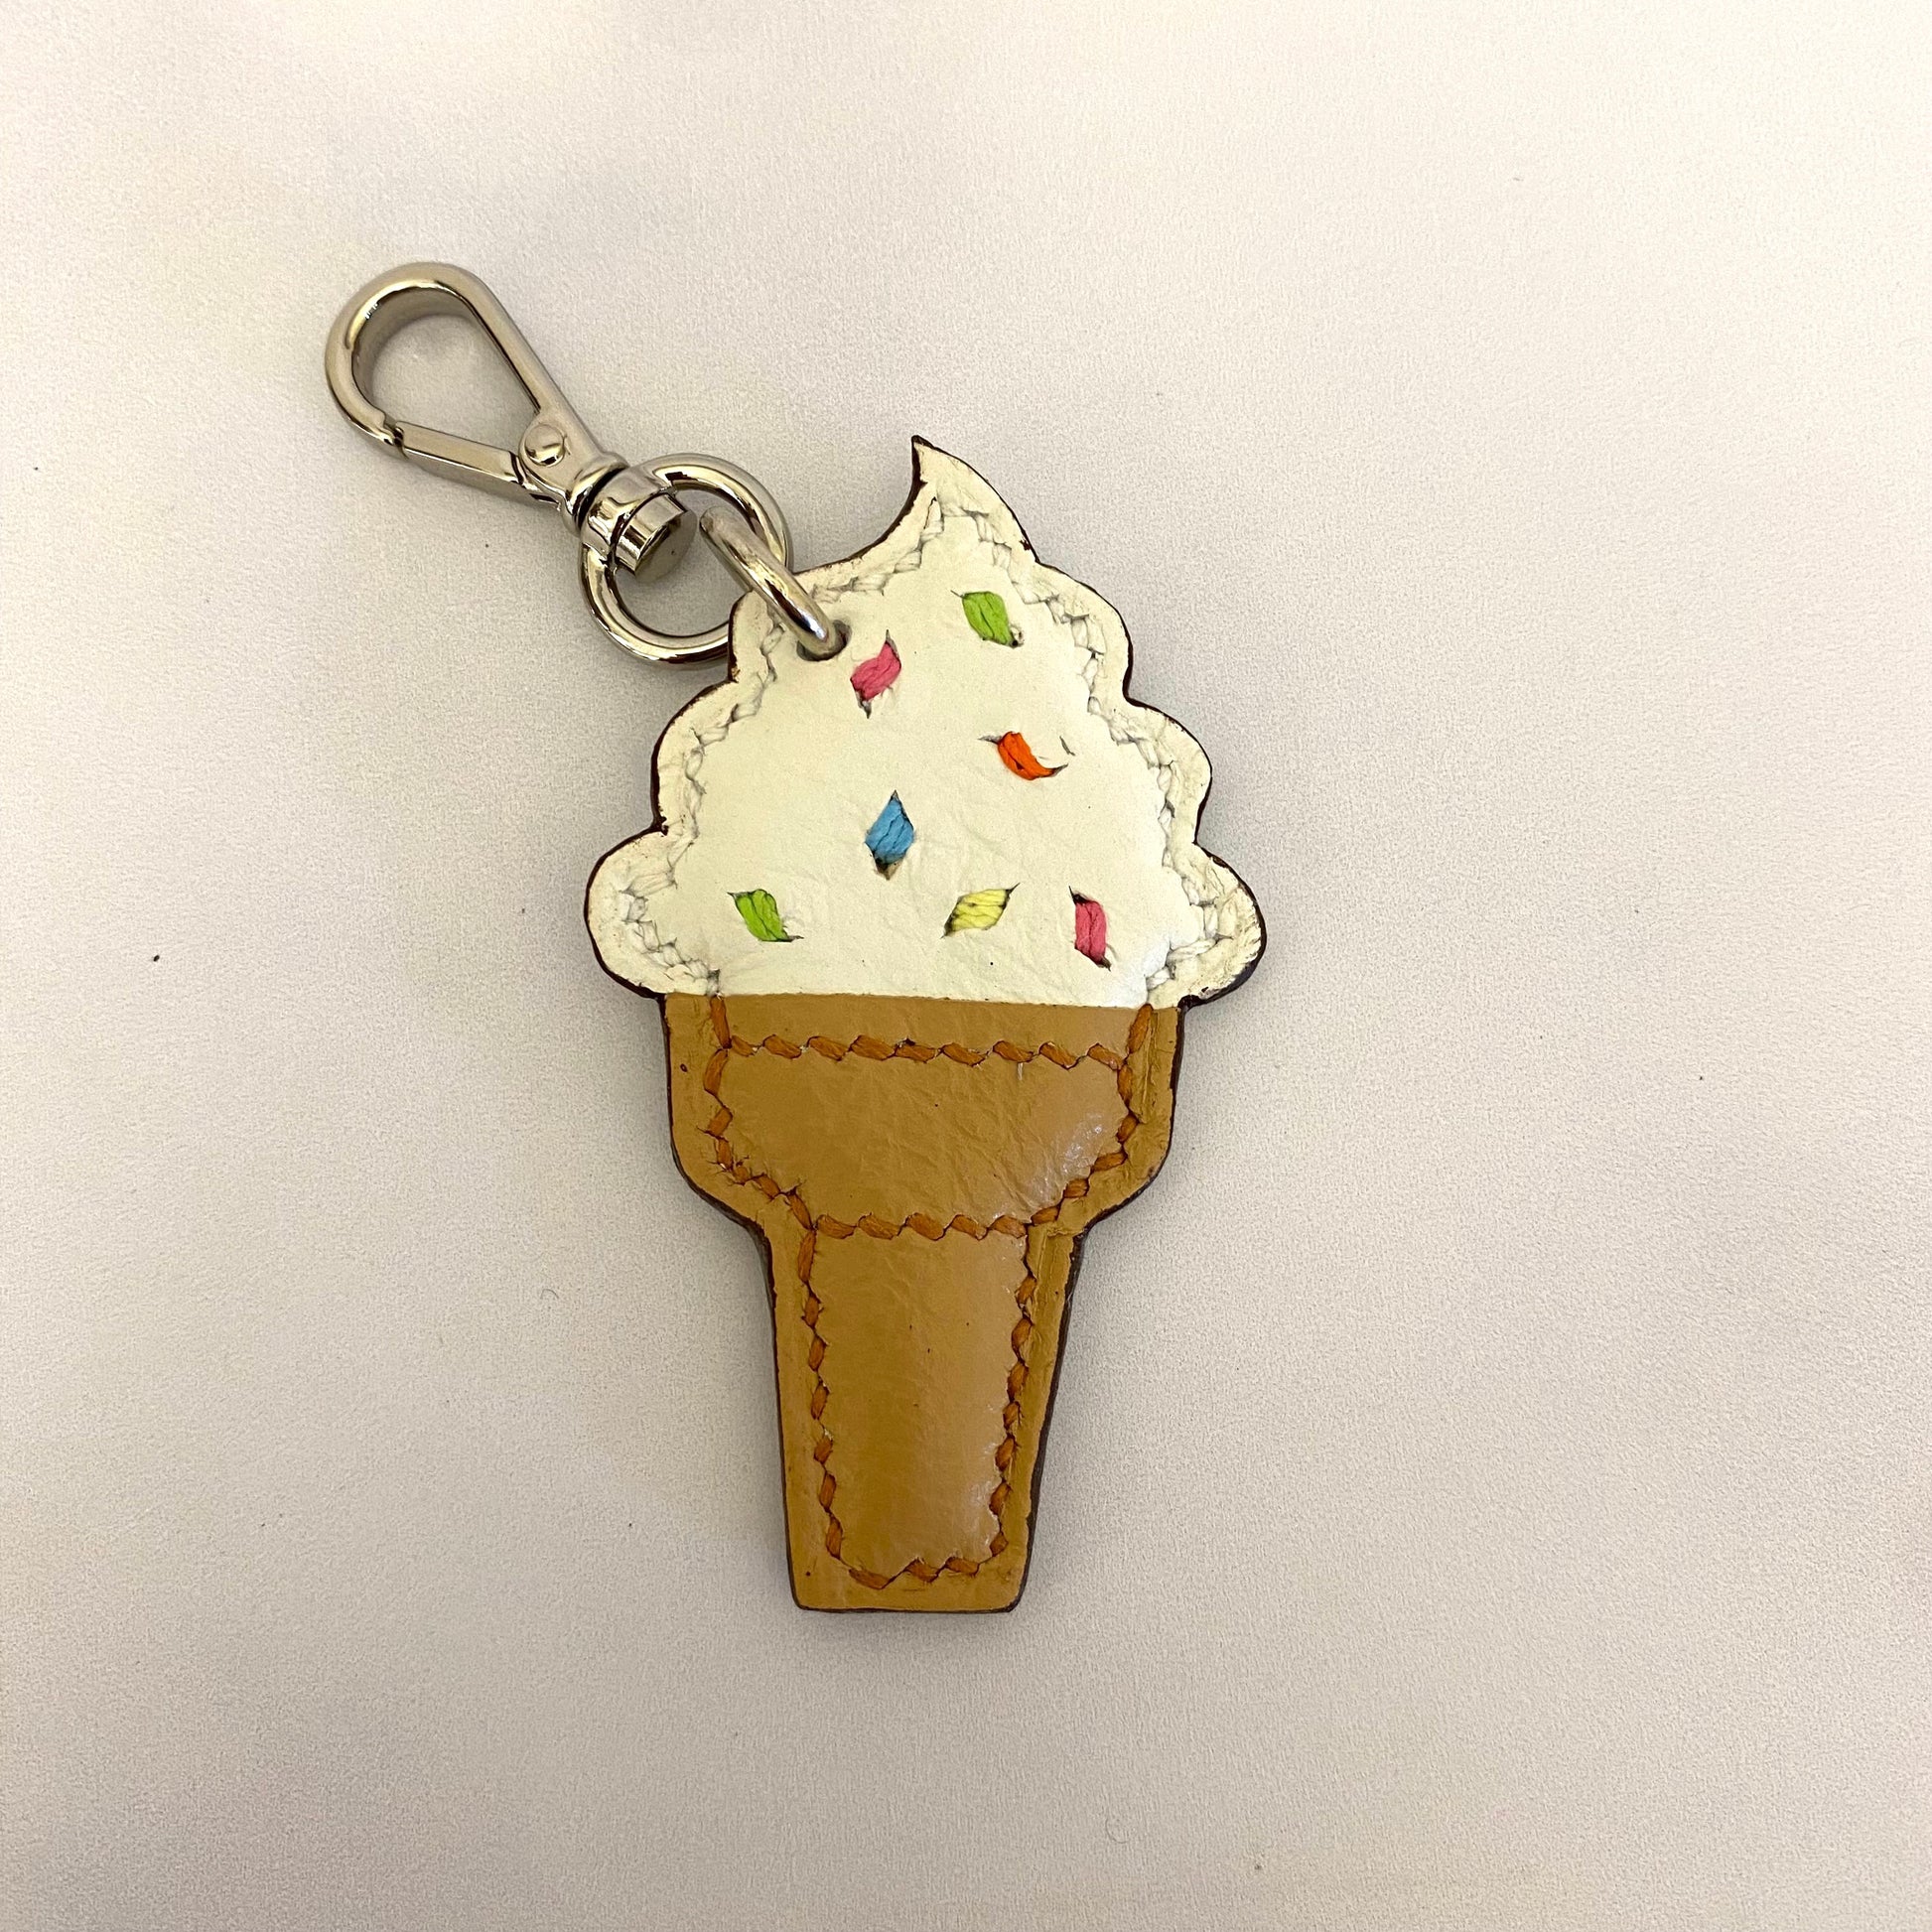 OwlTreePlace Purse Key Hook (with Ice Cream Cone Charm) - Never Lose Your Keys Again with This Key Finder